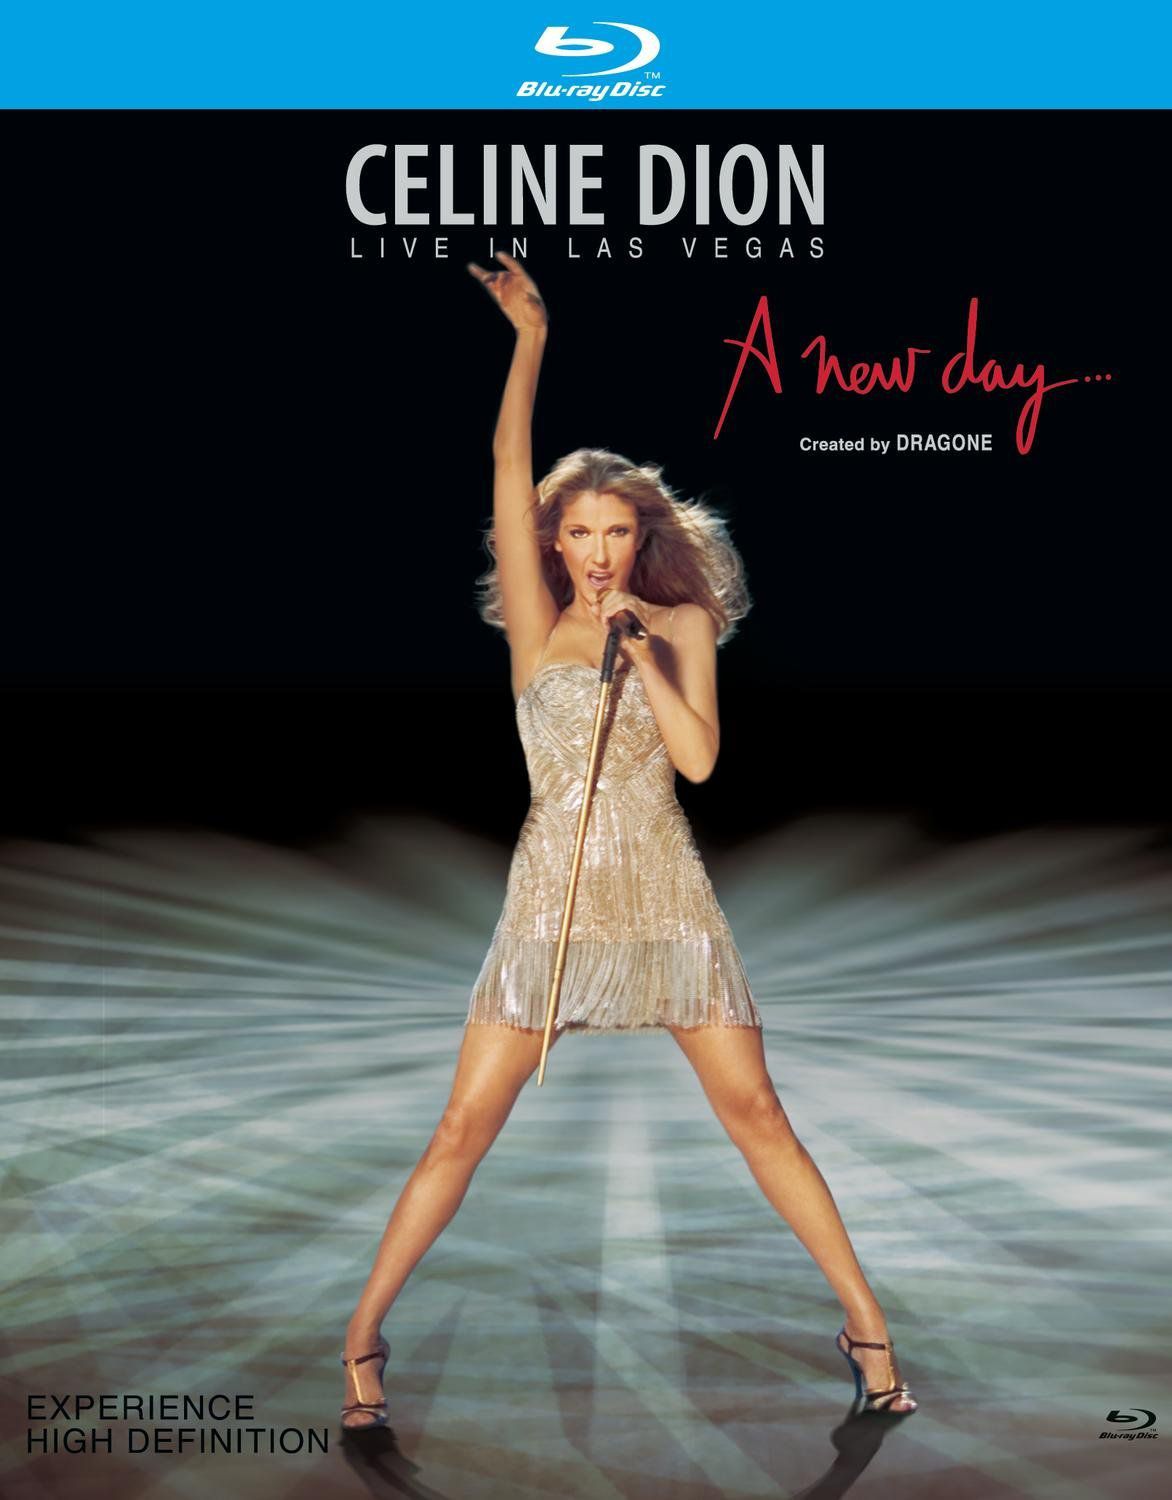 Celine Dion – Live in Las Vegas: A New Day